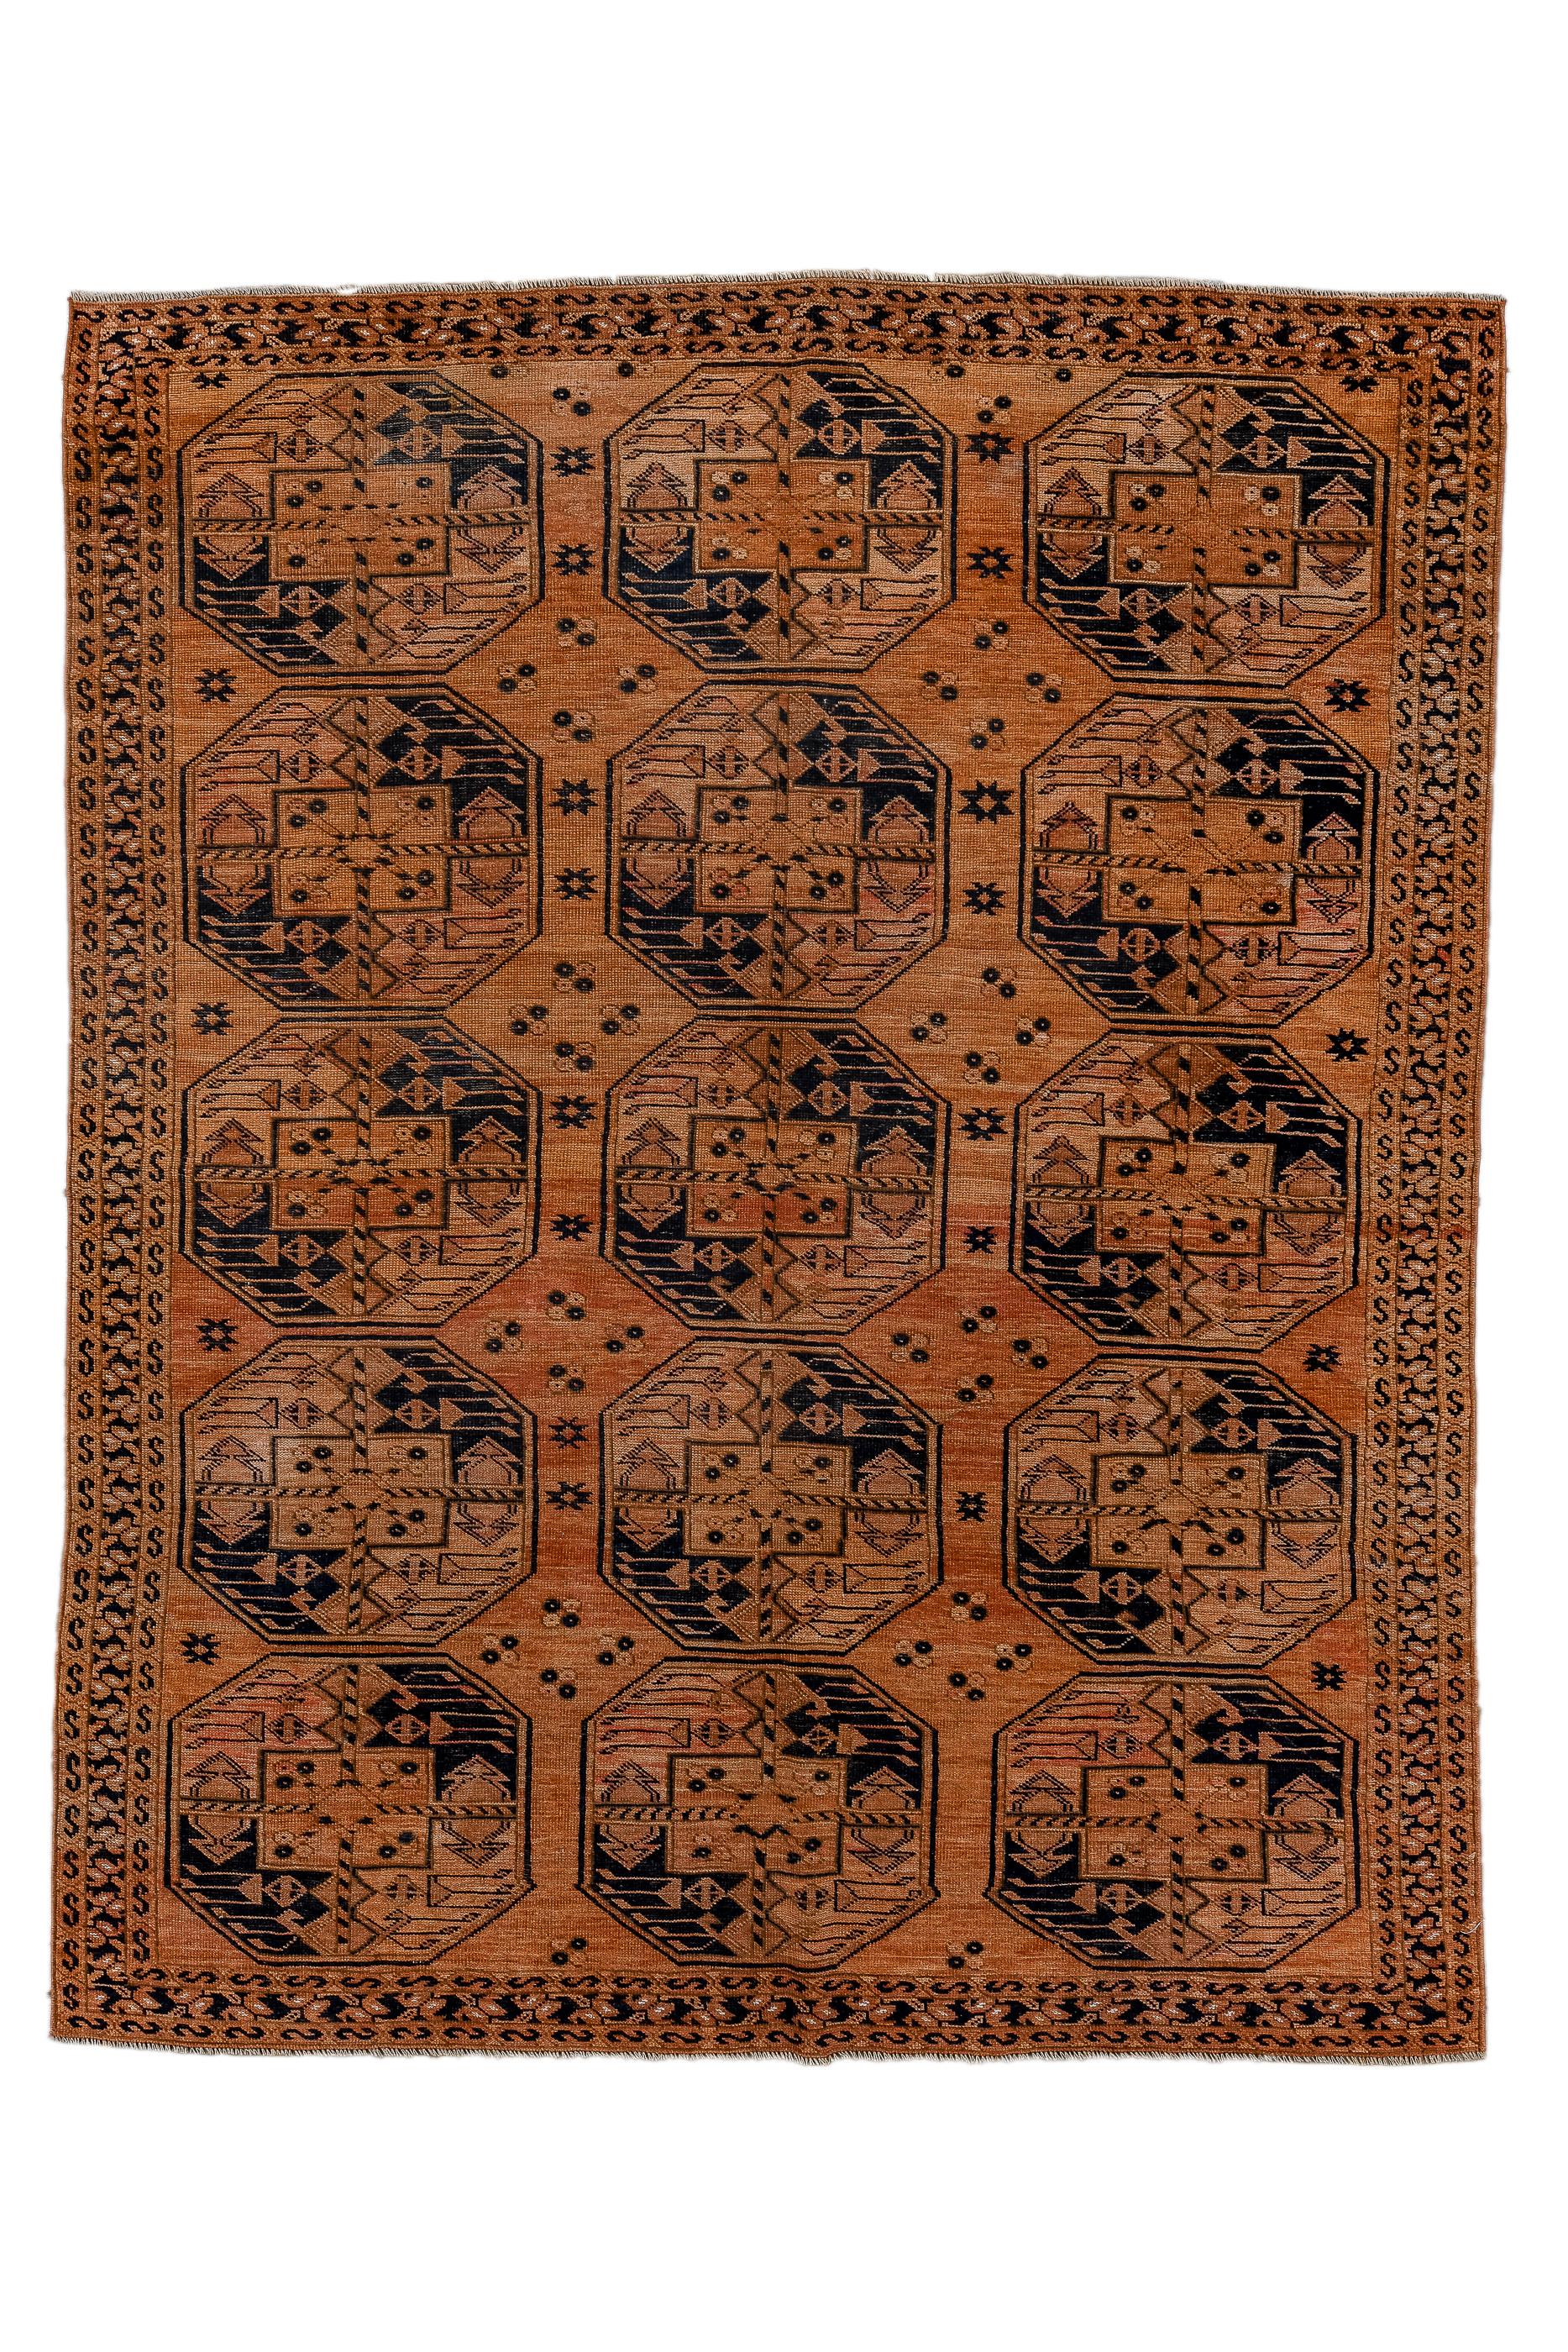 The abrashed rust field shows three columns, each of  five closely spaced octagonal Turkmen “Daulatabad” guls, quartered in  near black and light rusty brown.  Quartets of small, divided squares act as minor gul devices between the larger elements. 